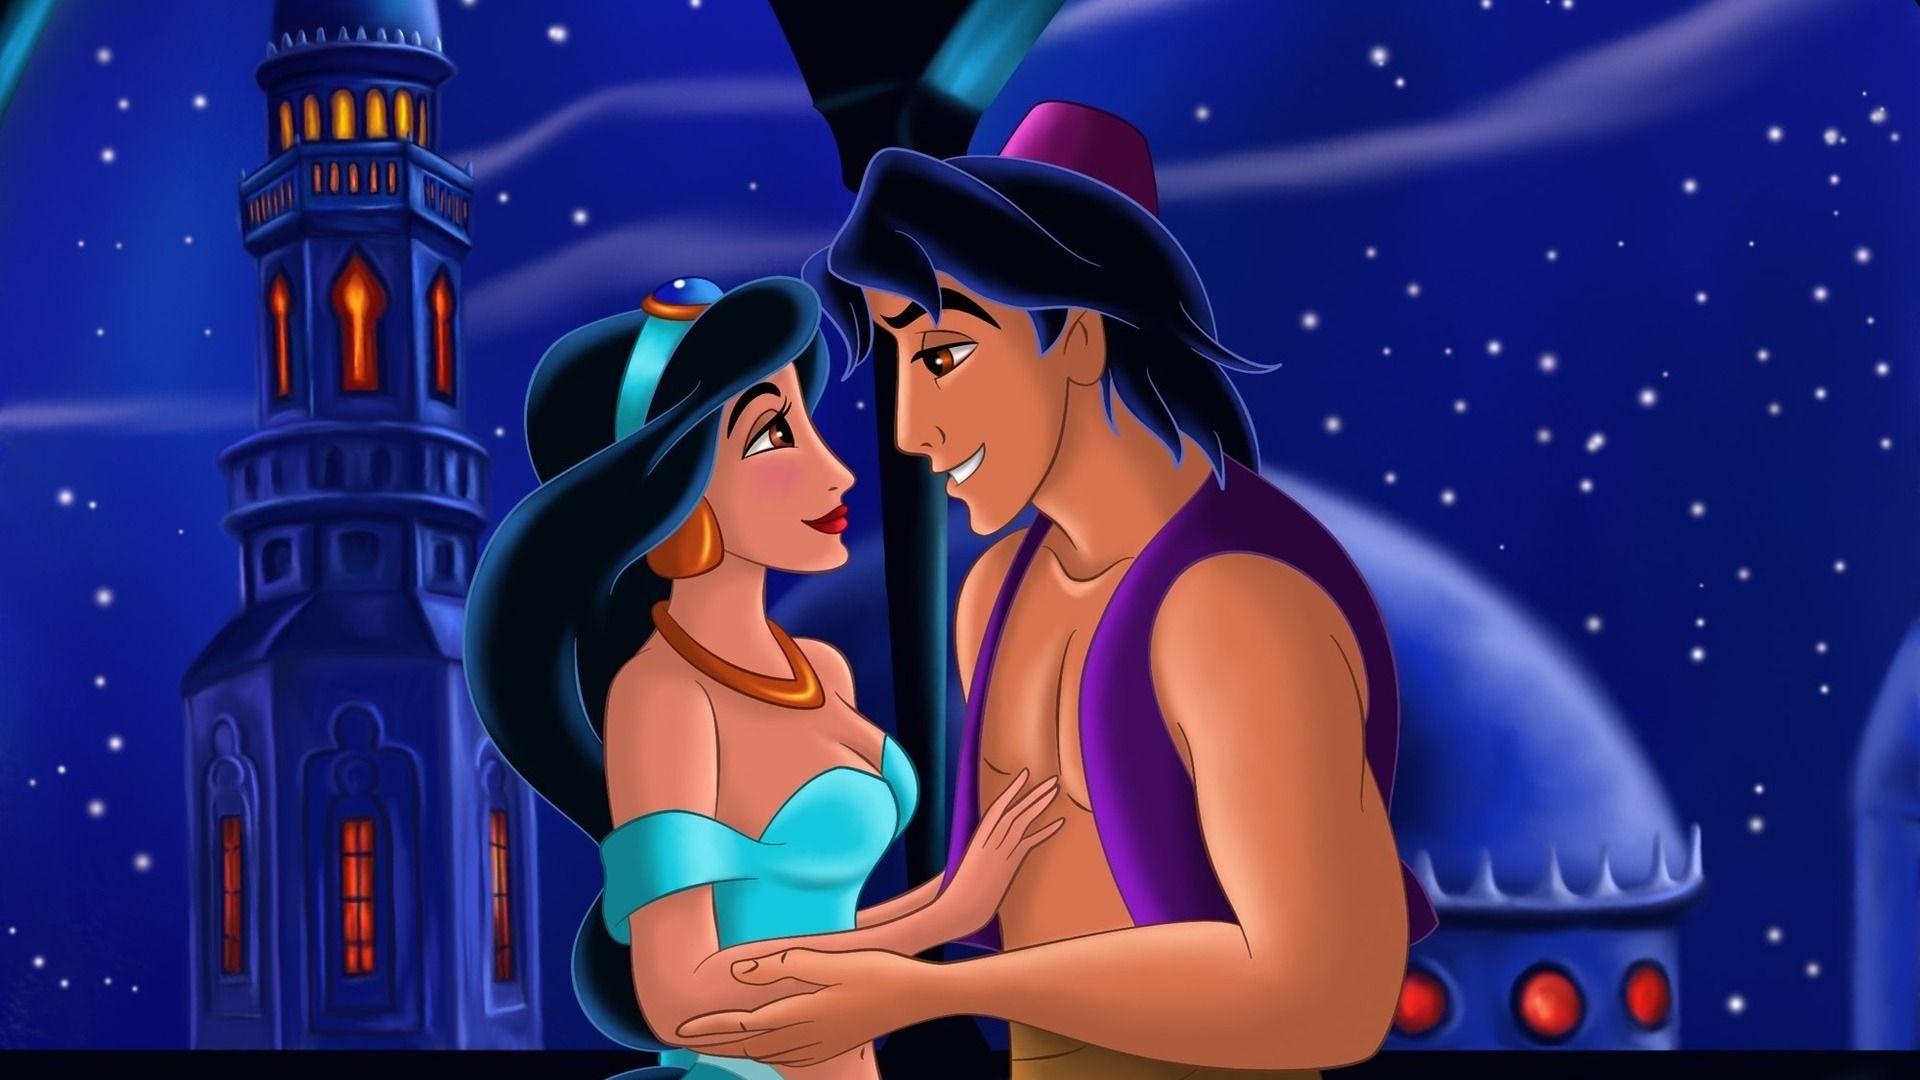 Are you looking for Aladdin cartoon wallpaper? Find latest Aladdin